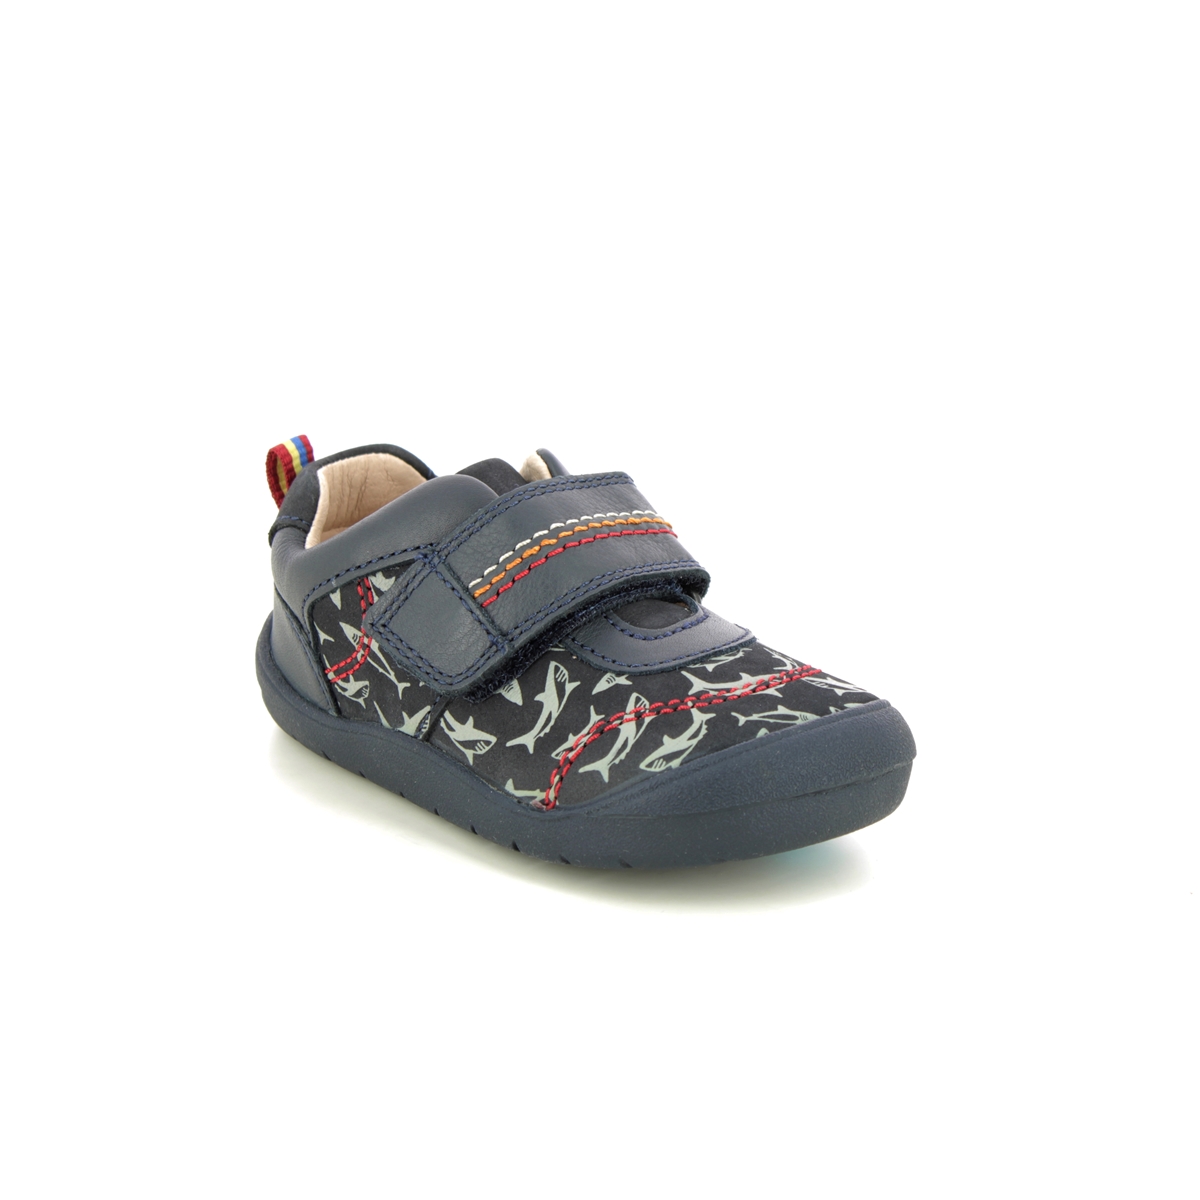 Start Rite - Jaws In Navy Nubuck 0782-96F In Size 4 In Plain Navy Nubuck Boys First And Toddler Shoes  In Navy Nubuck For kids